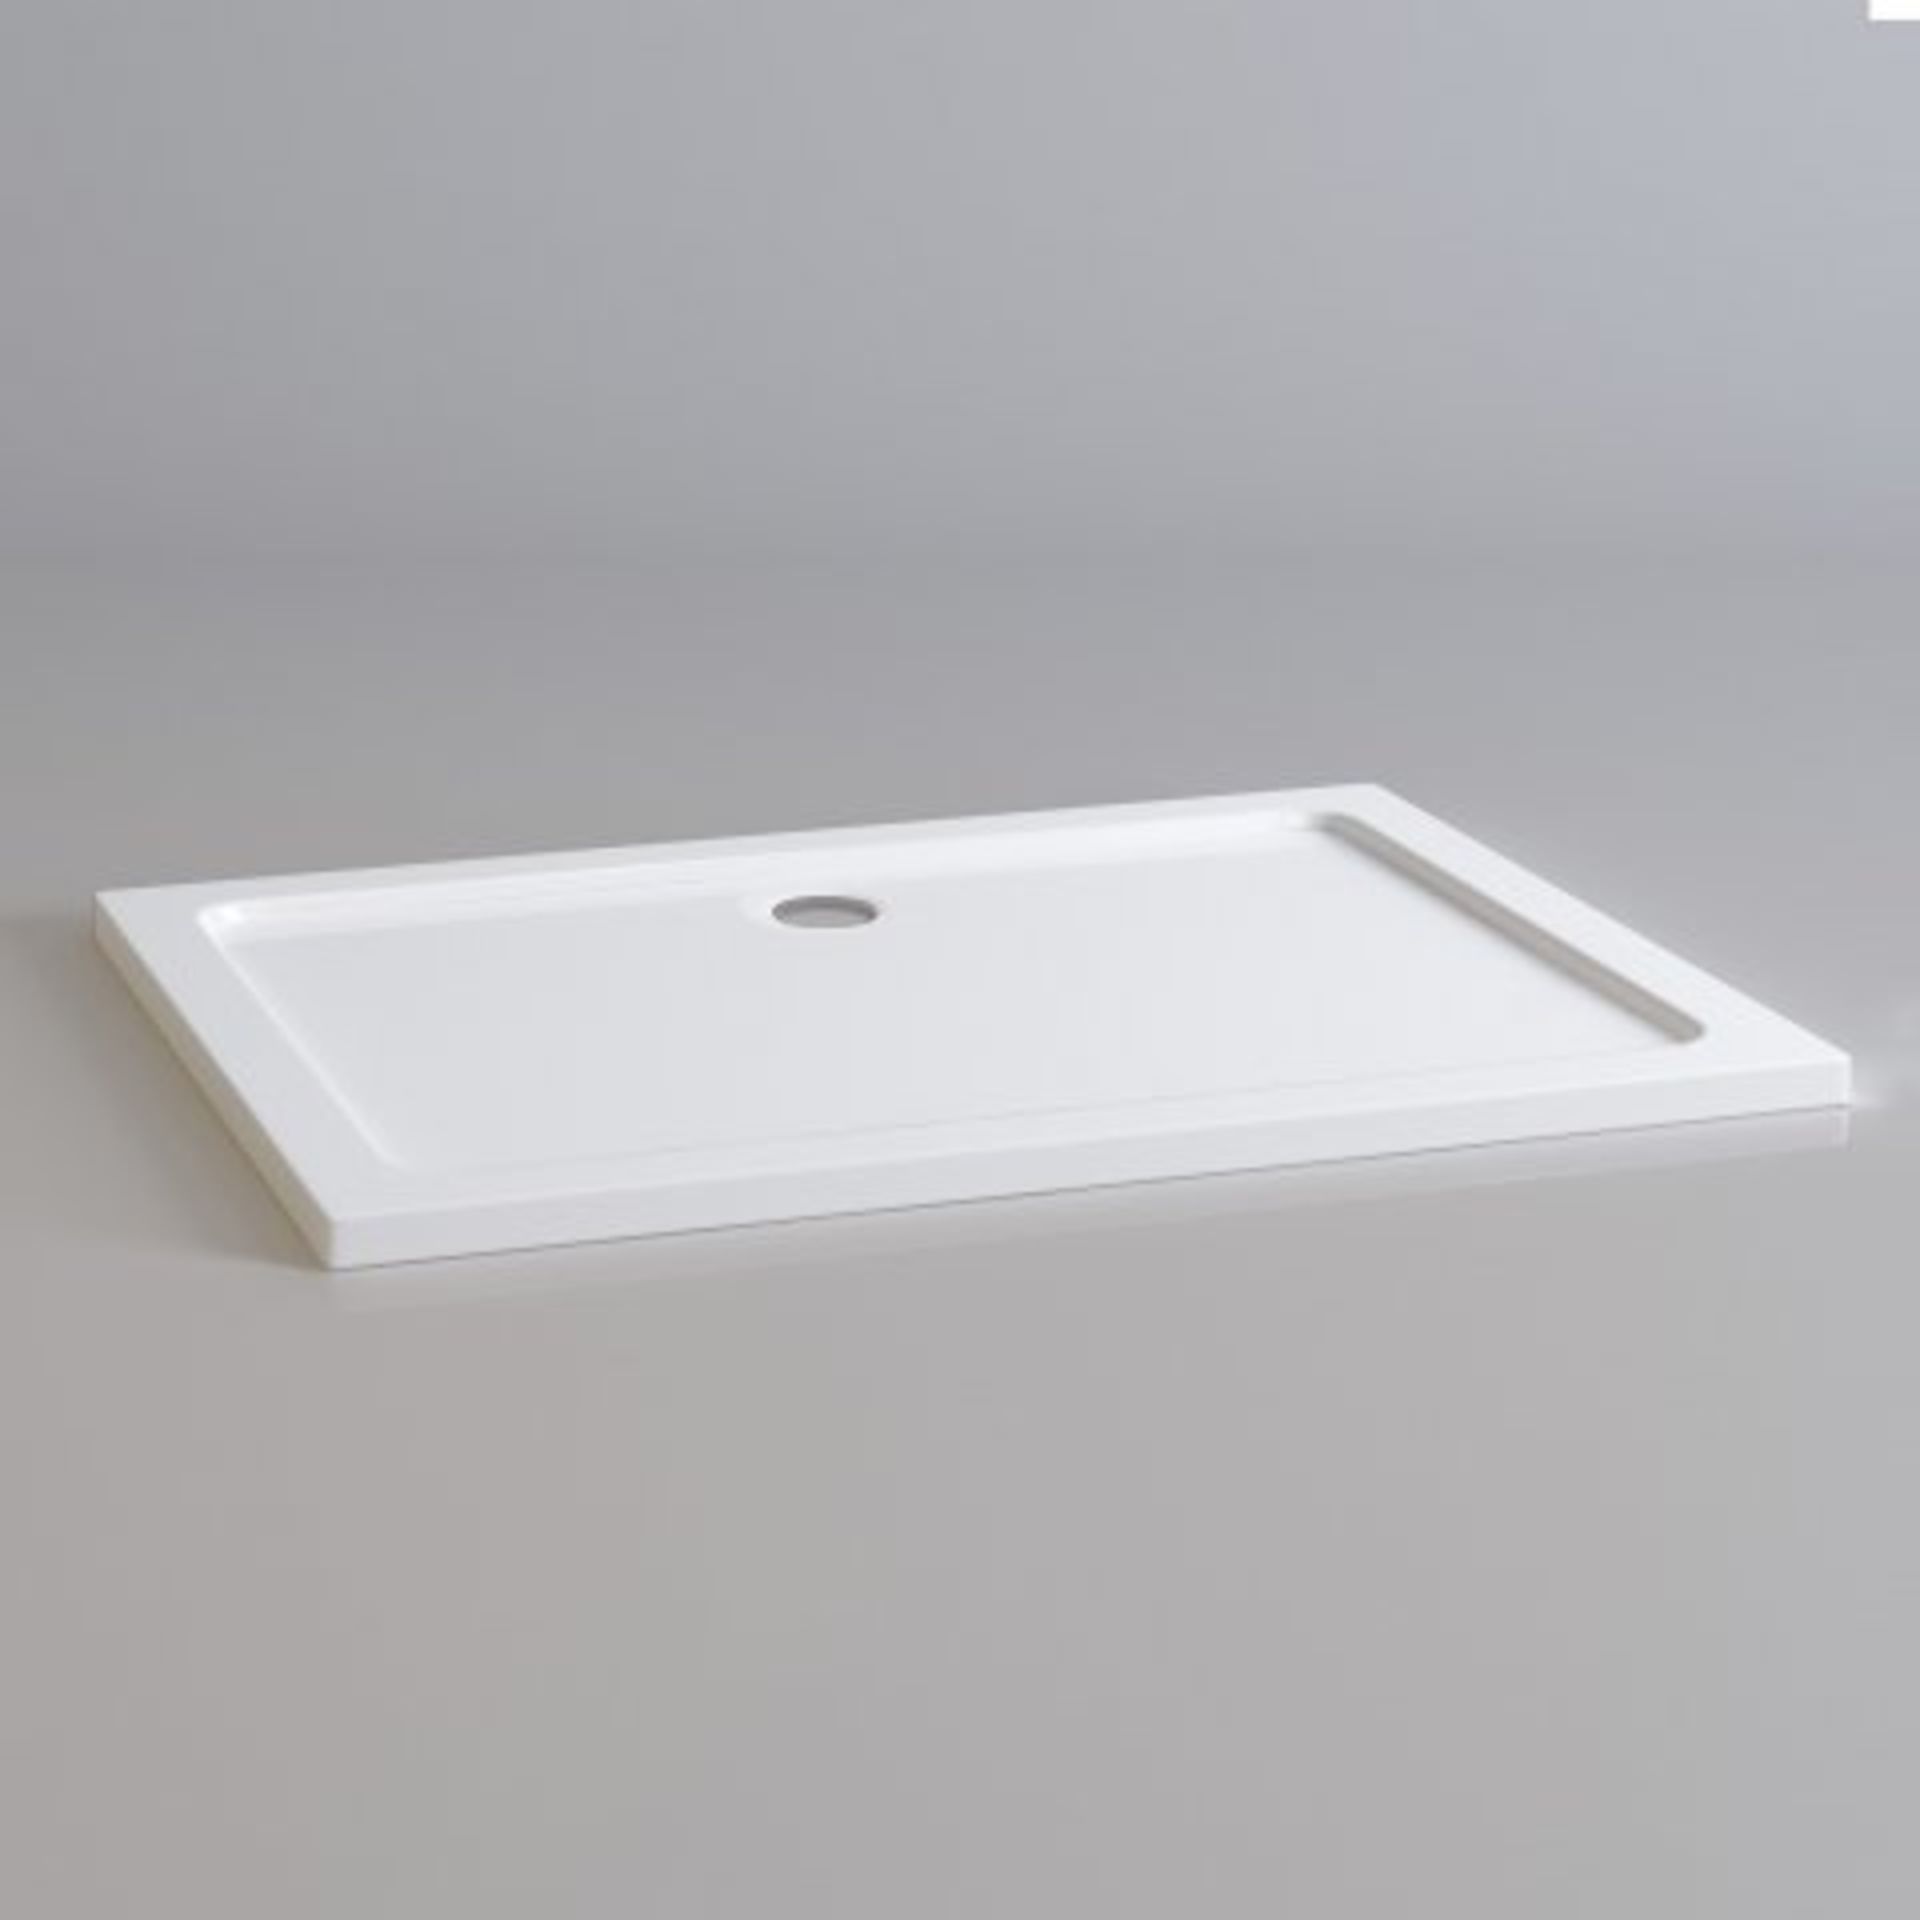 BRAND NEW BOXED 1200x900mm Rectangular Ultra Slim Stone Shower Tray.RRP £399.99.Our brilliant ... - Image 2 of 2